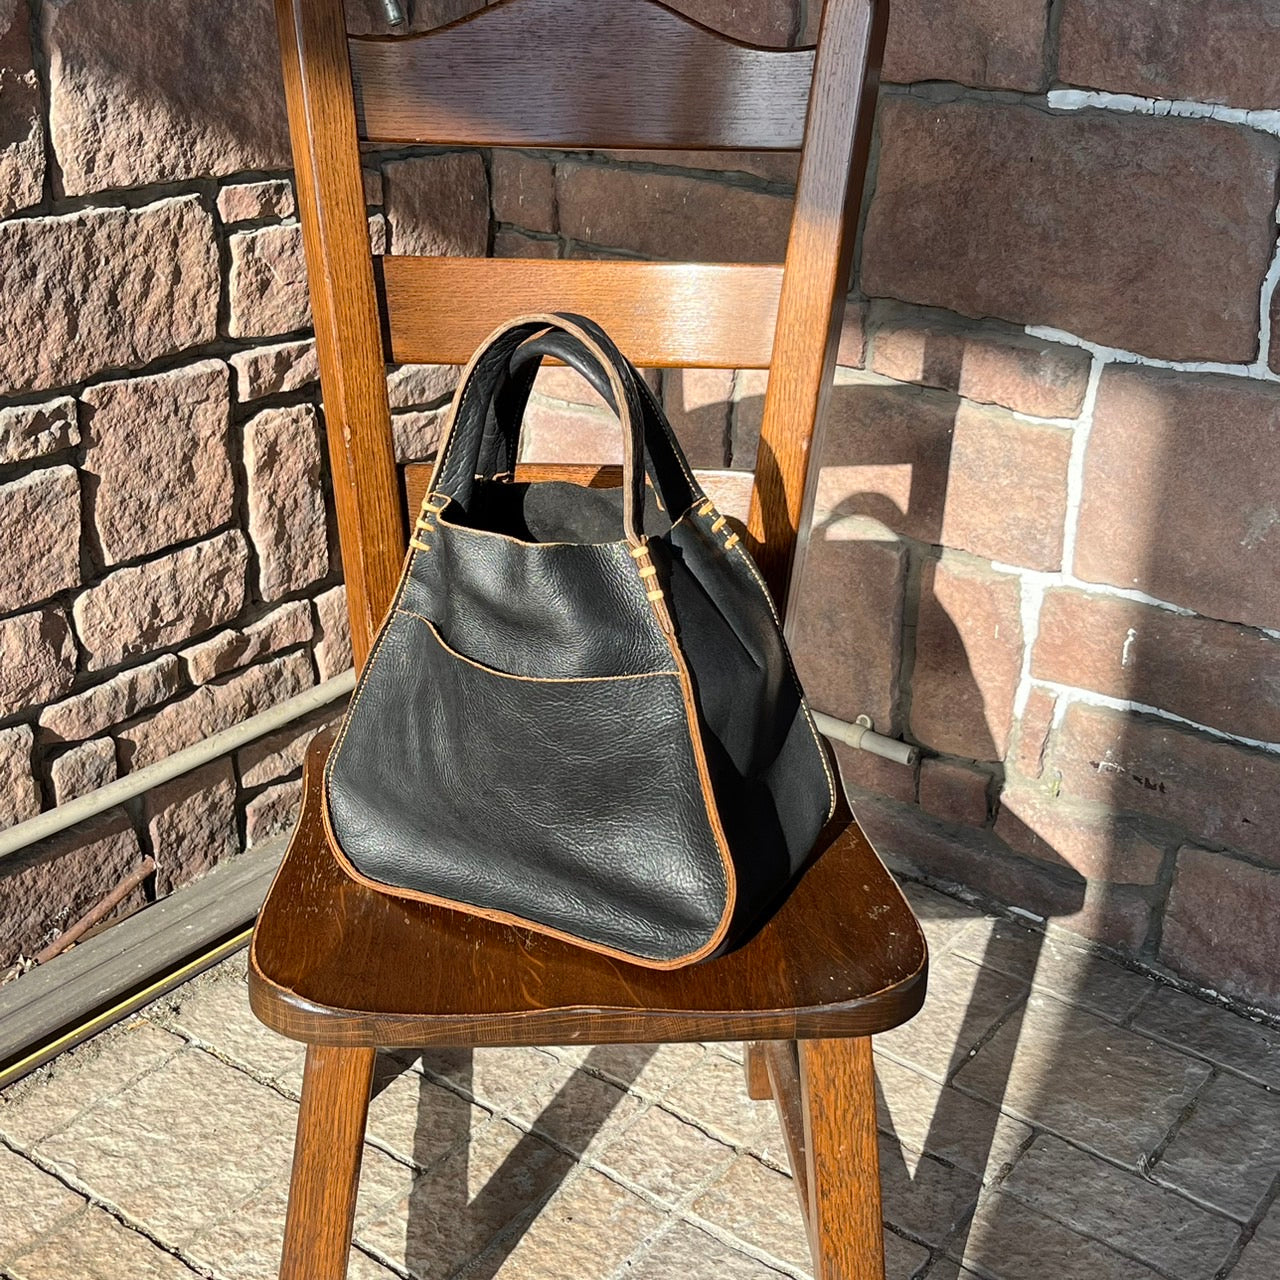 i.s. ISSEY MIYAKE(アイエス イッセイミヤケ) 80's leather triangle  tote bag/レザートートバッグ IS33-AG005 ブラック 厚手　IS 80s